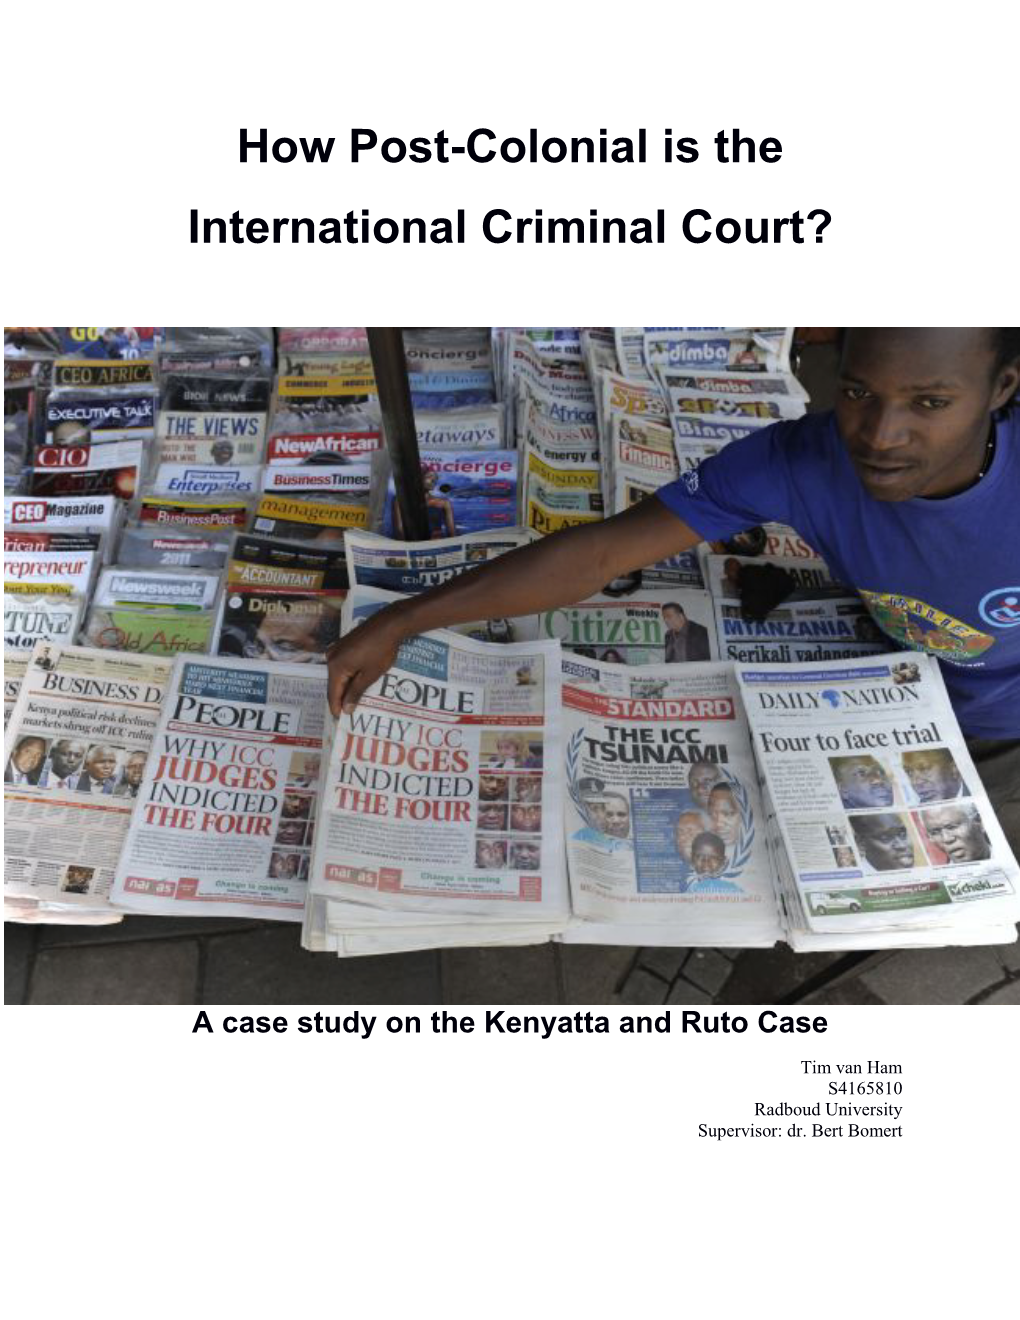 How Post-Colonial Is the International Criminal Court?